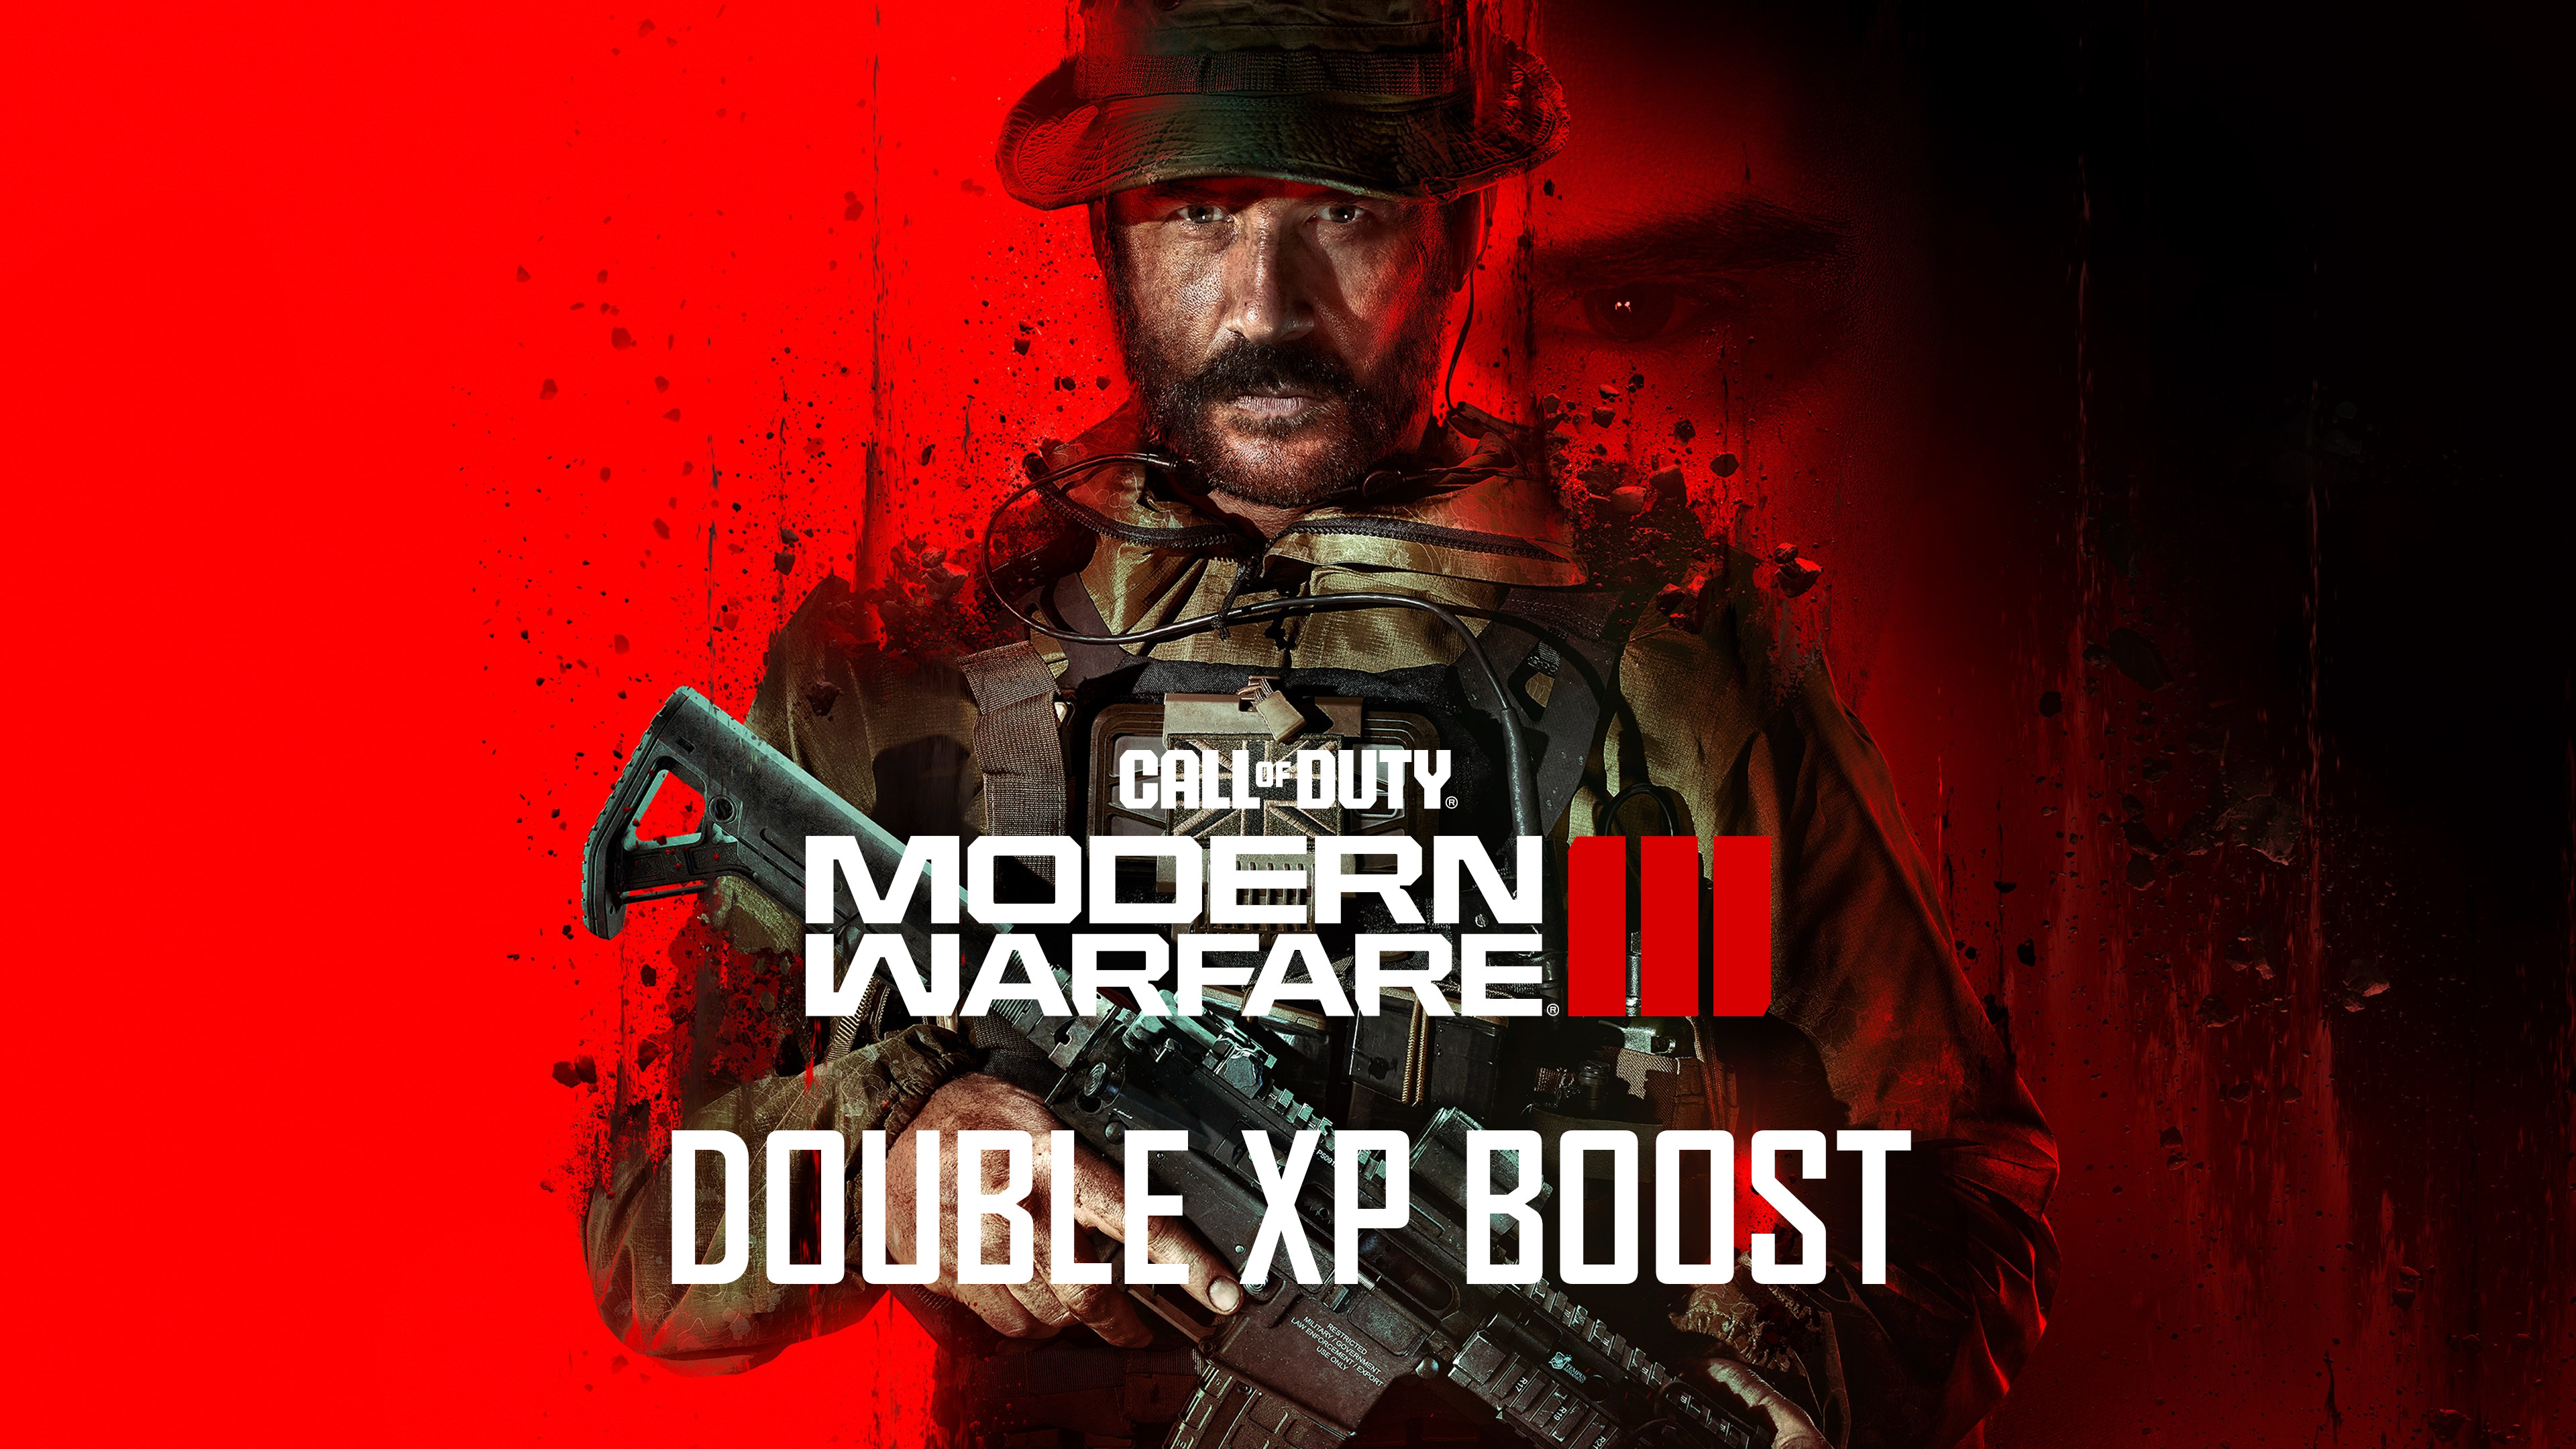 Call of Duty: Modern Warfare III - 3 Hours Double XP Boost PC/PS4/PS5/XBOX One/Series X|S CD Key (1.93$)